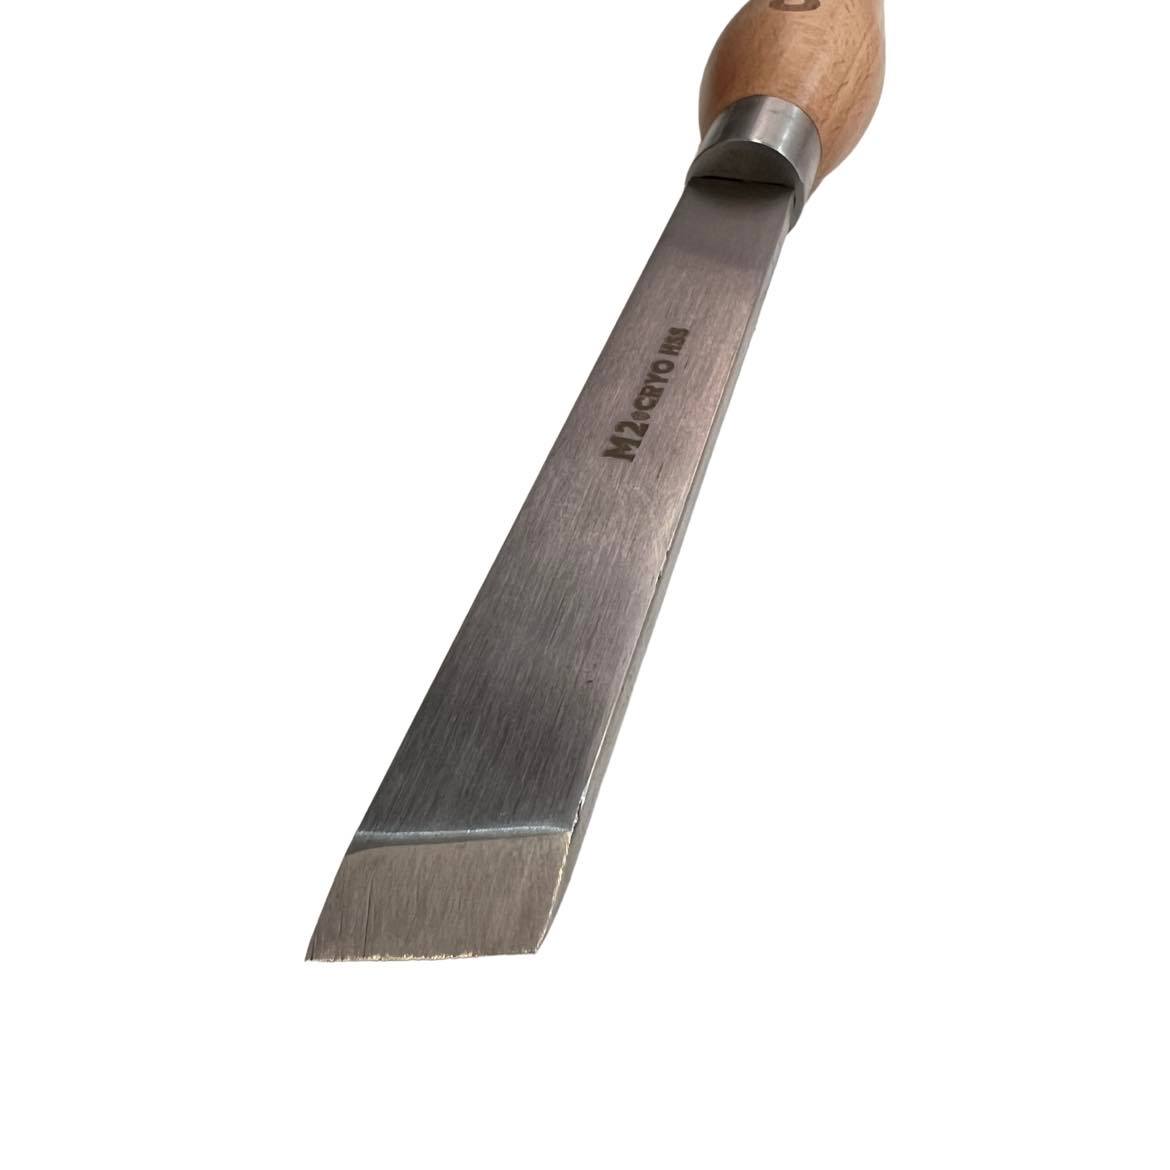 Woodturning Tool Skew Cutter 19mm by Oltre